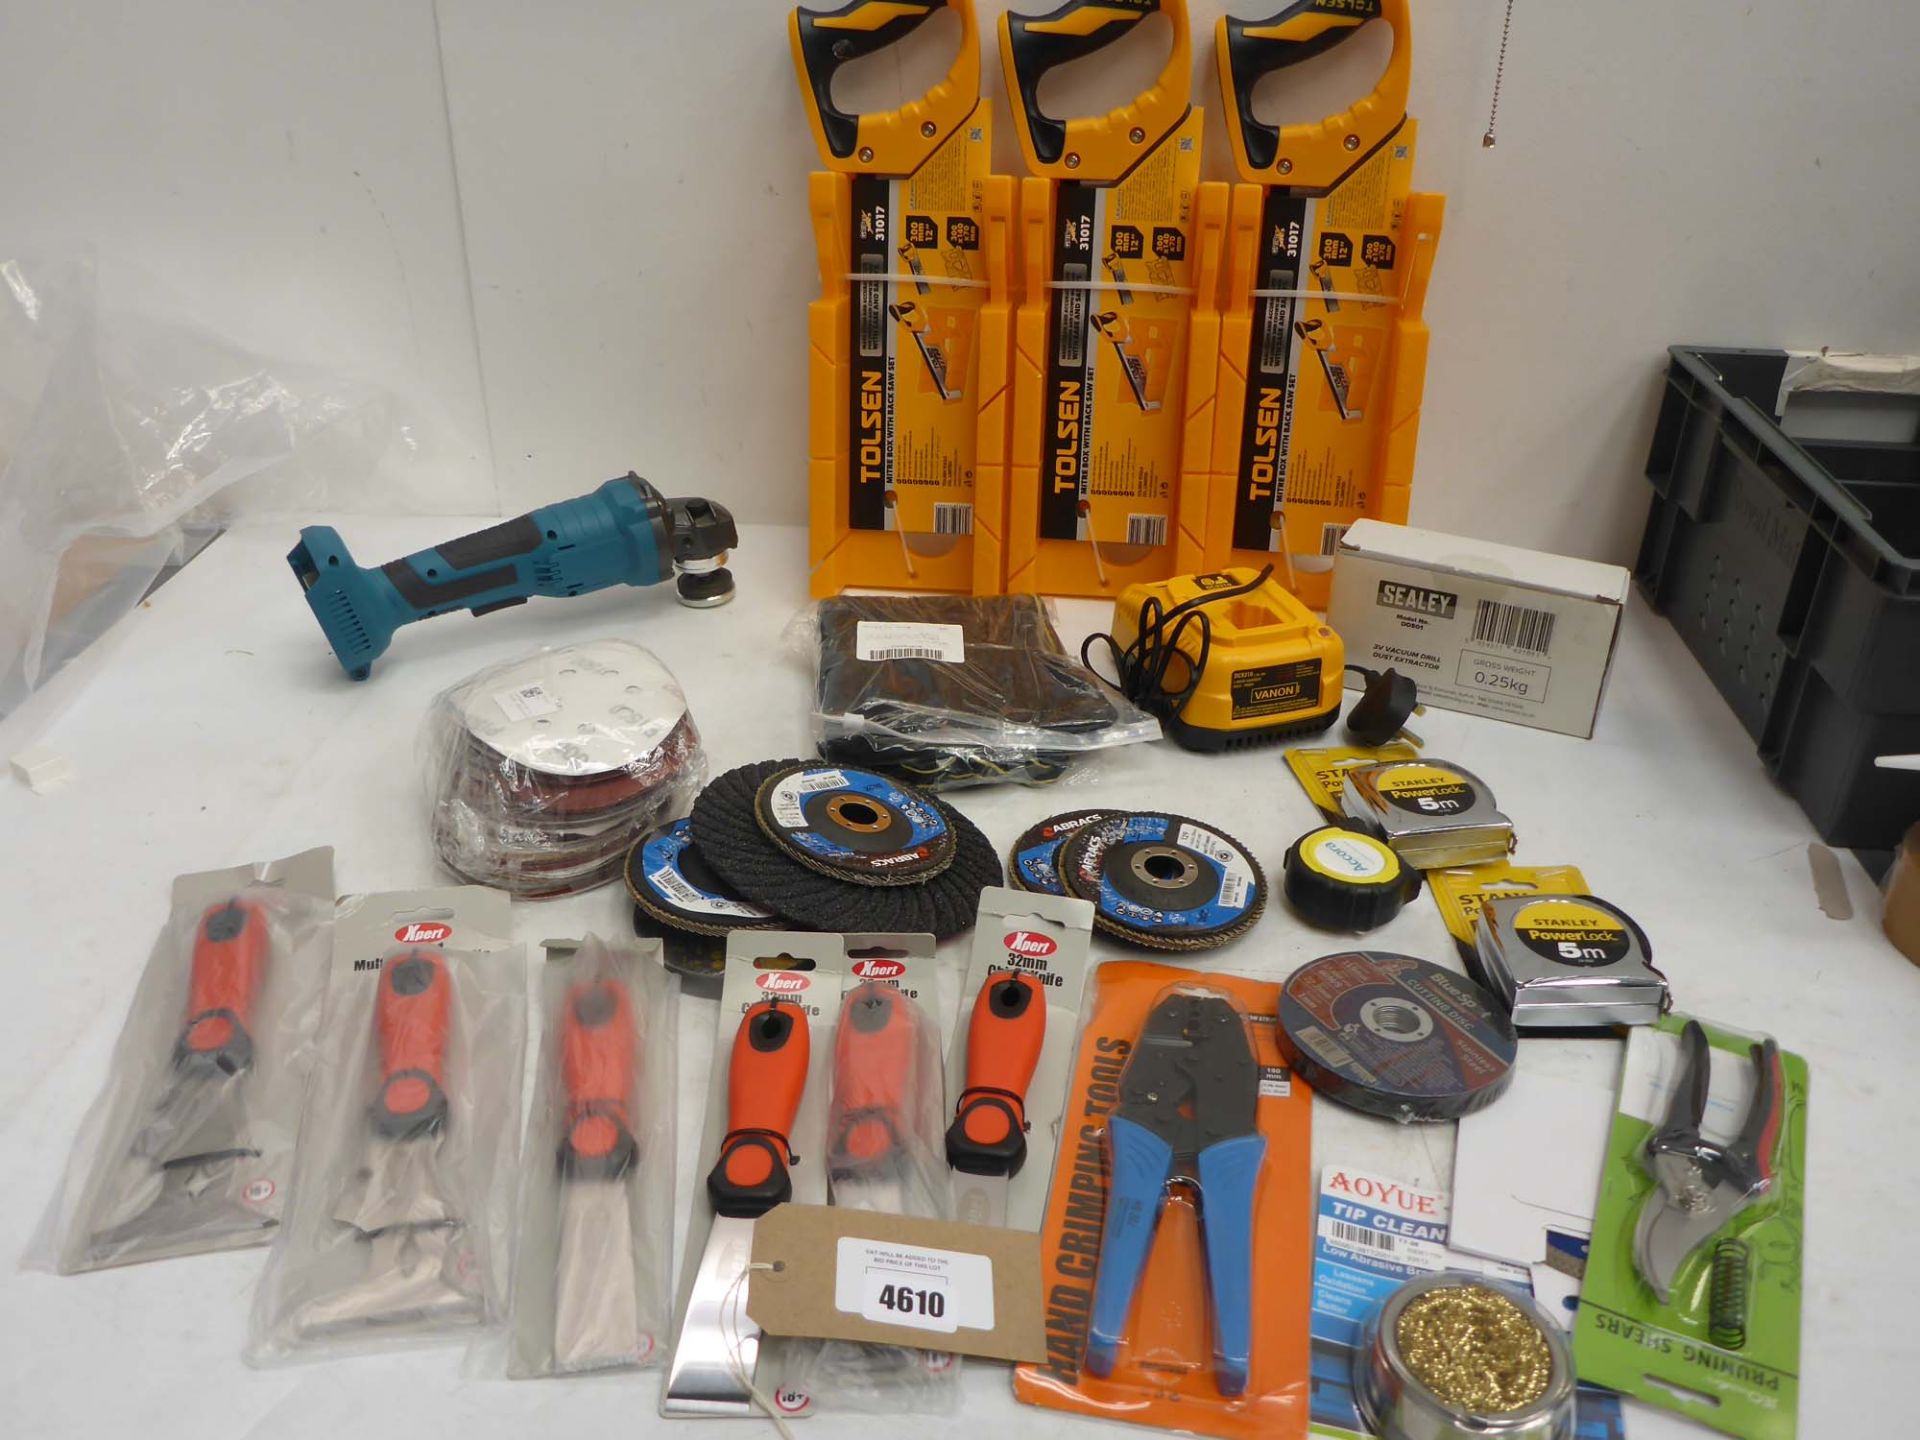 Mitre box with back saw sets, sanding & grinding discs, chisel knifes, multi purpose knifes, battery